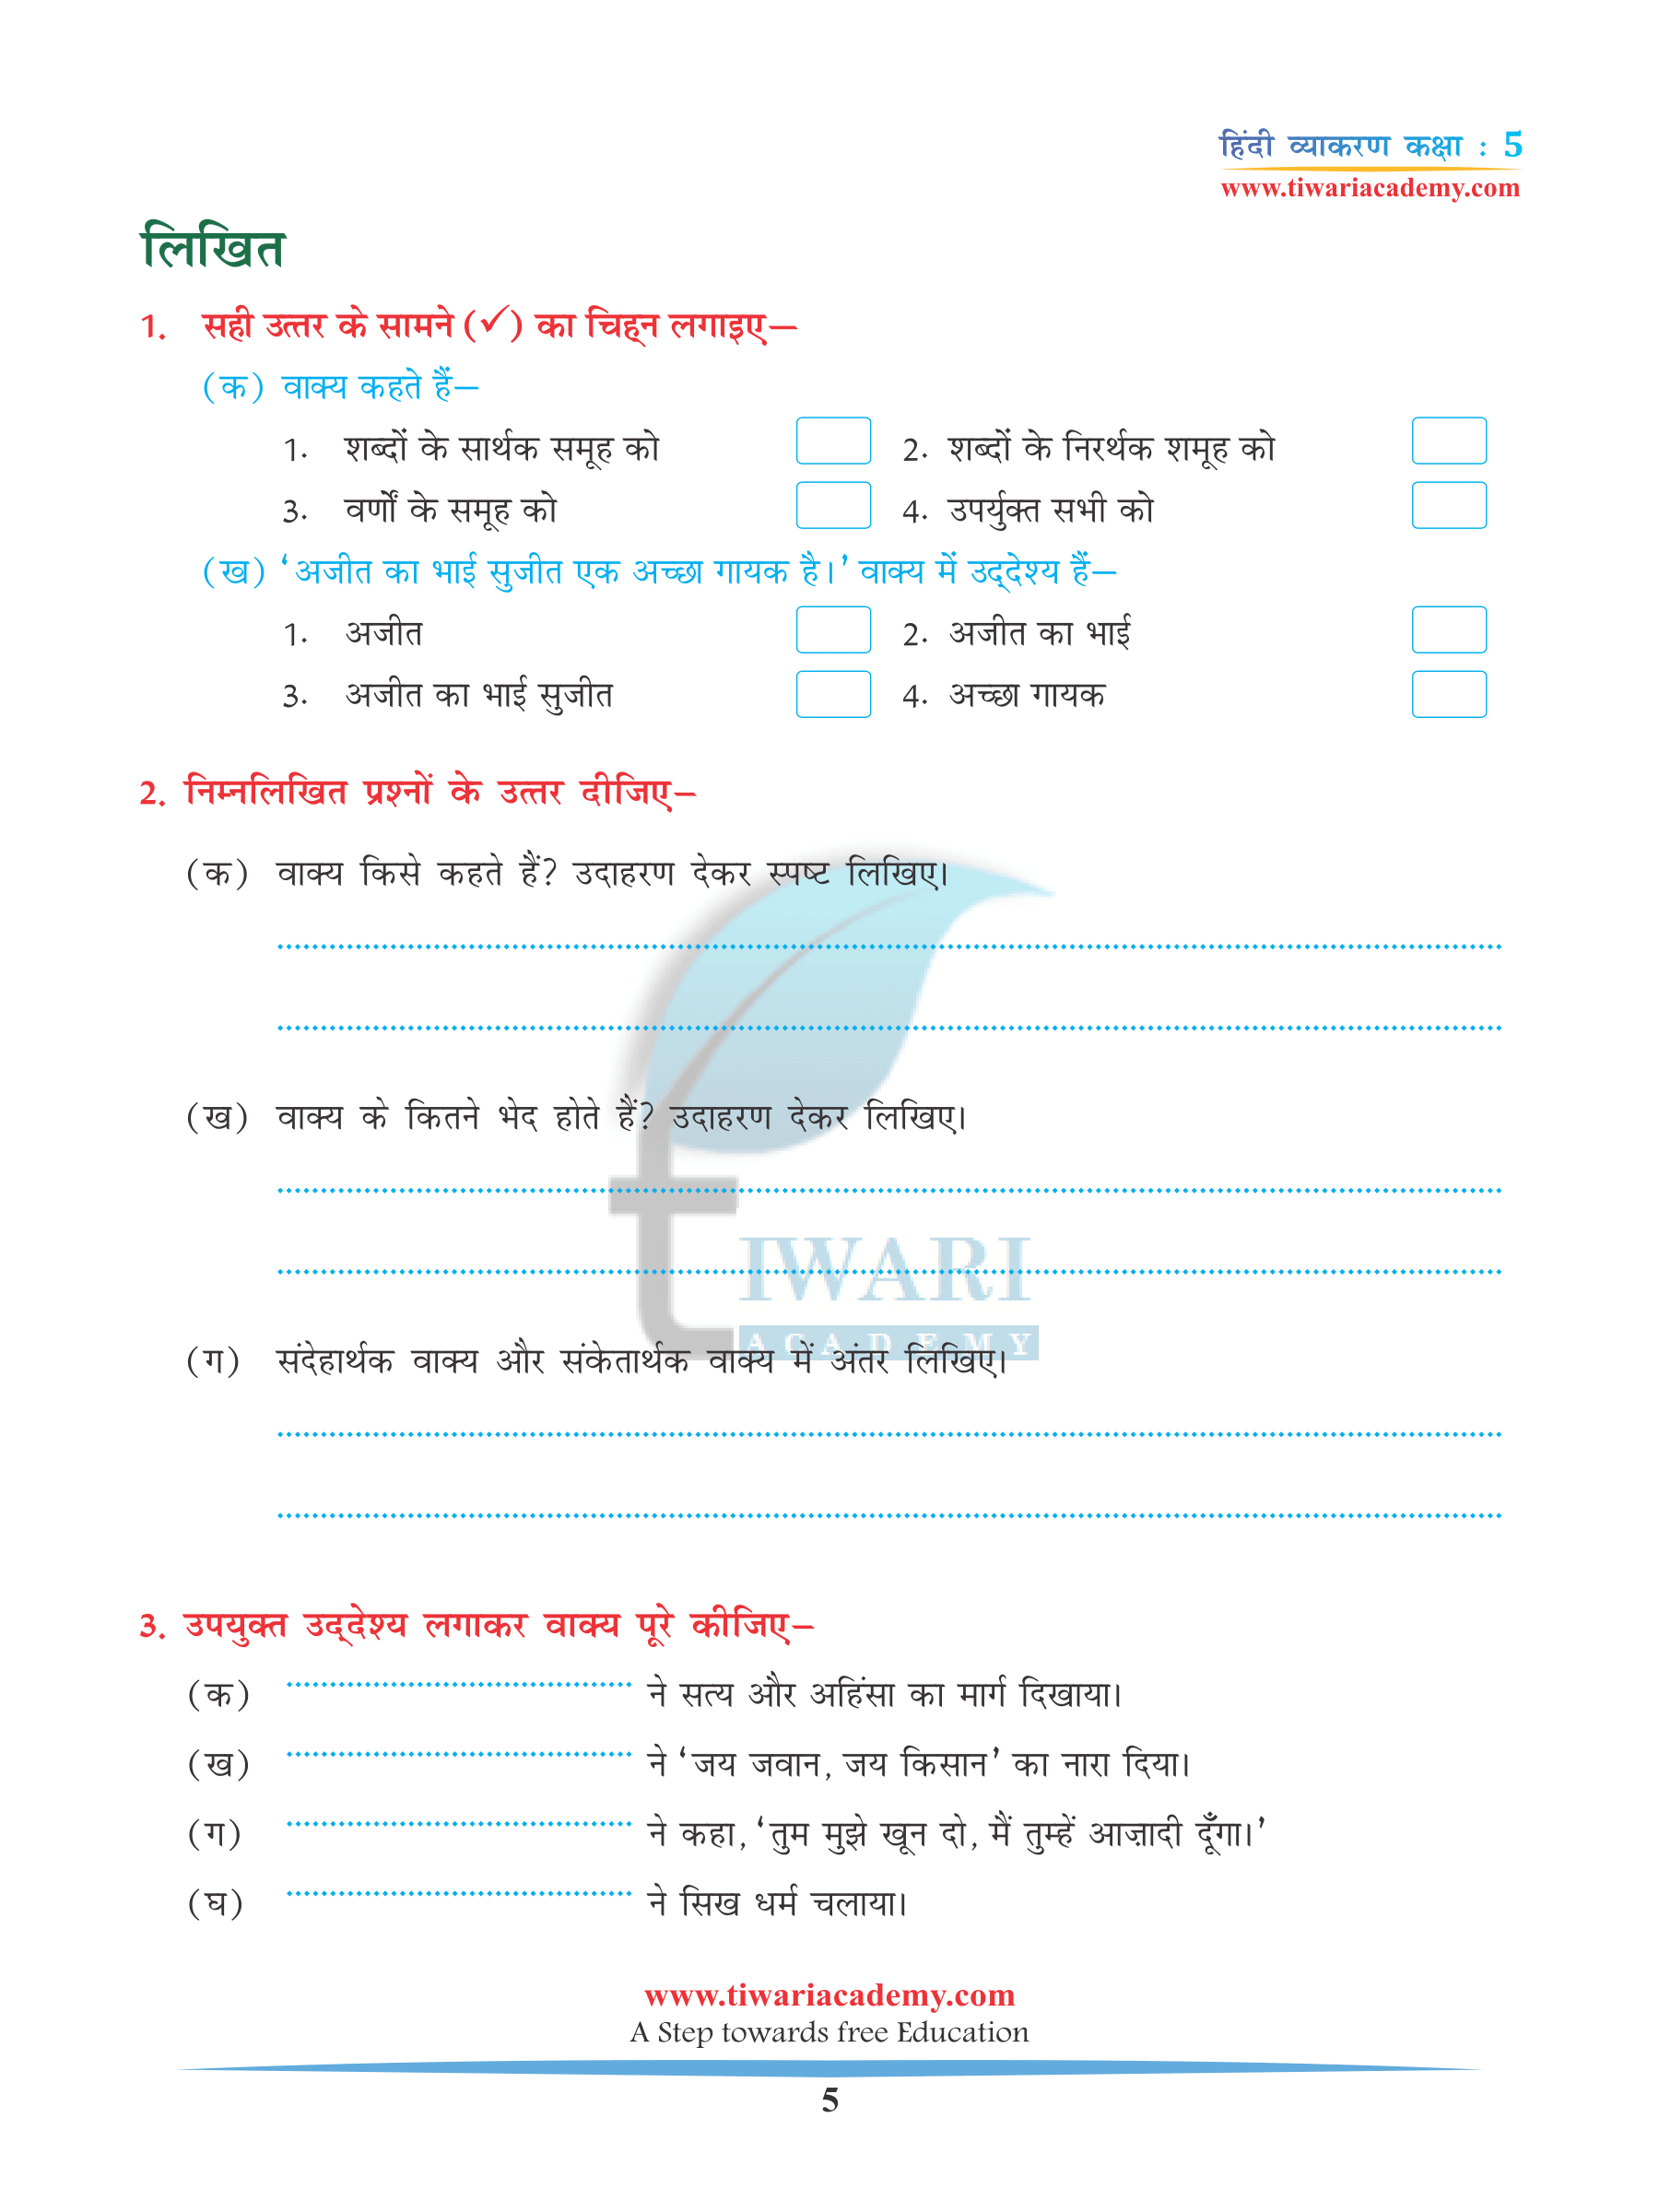 Class 5 Hindi Grammar Chapter 11 for up board